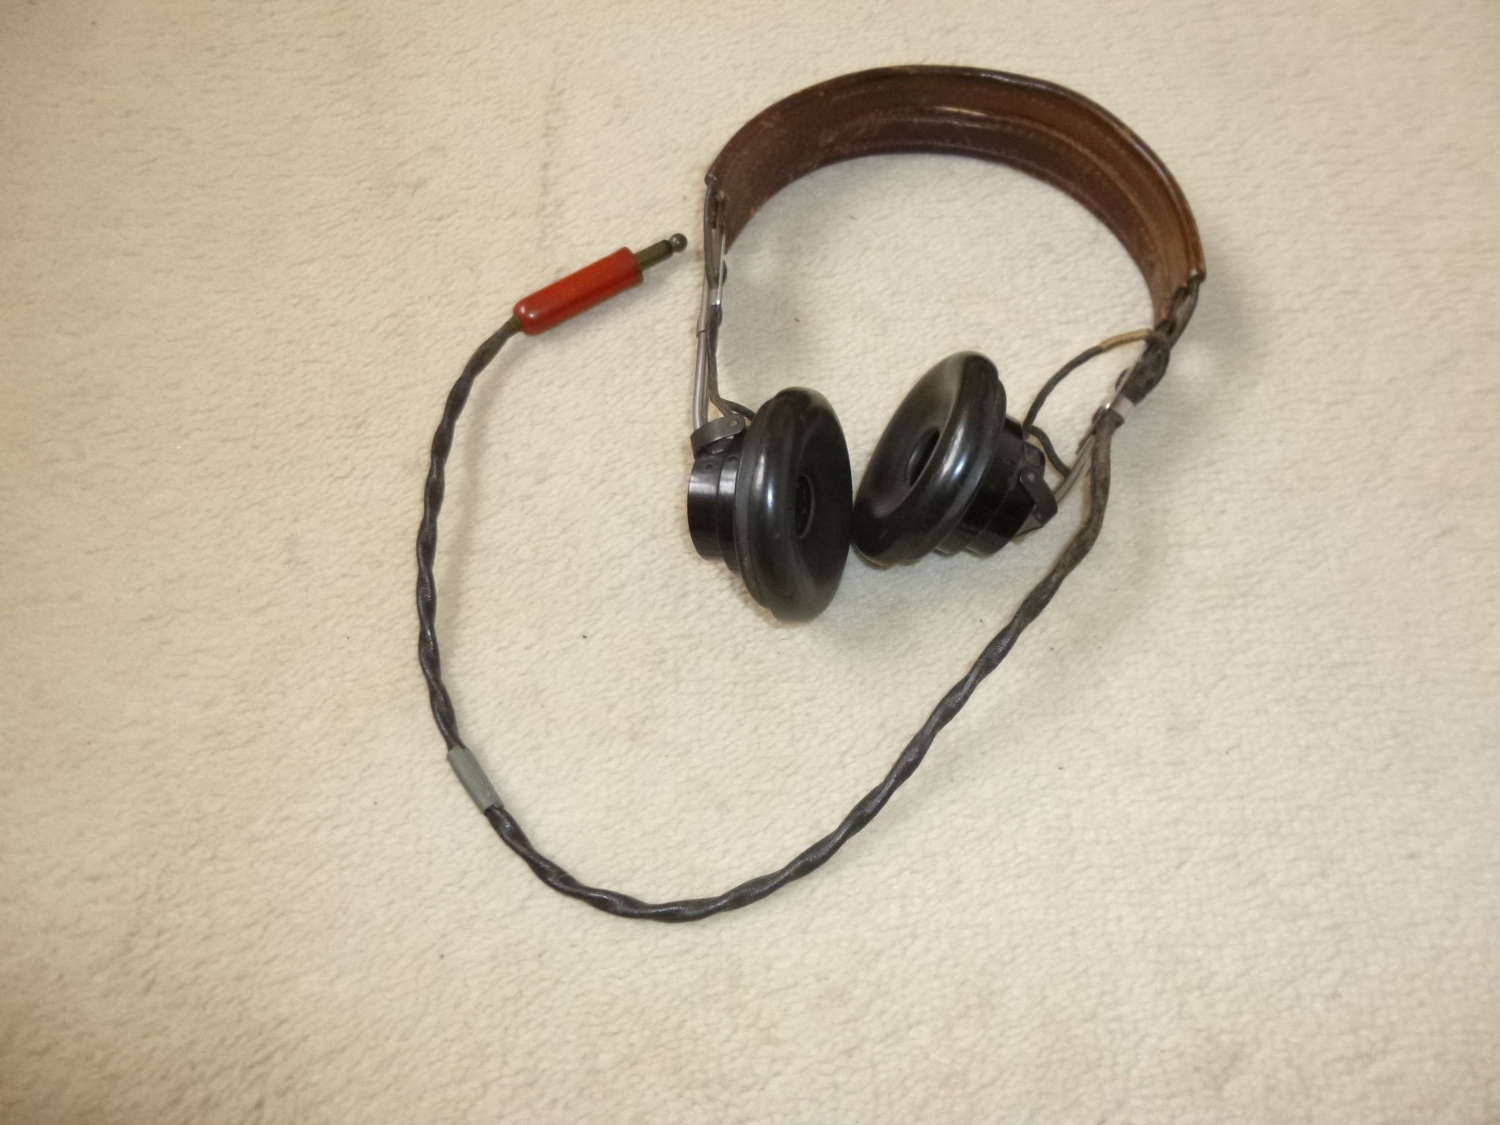 US Air Force HS-33 headset